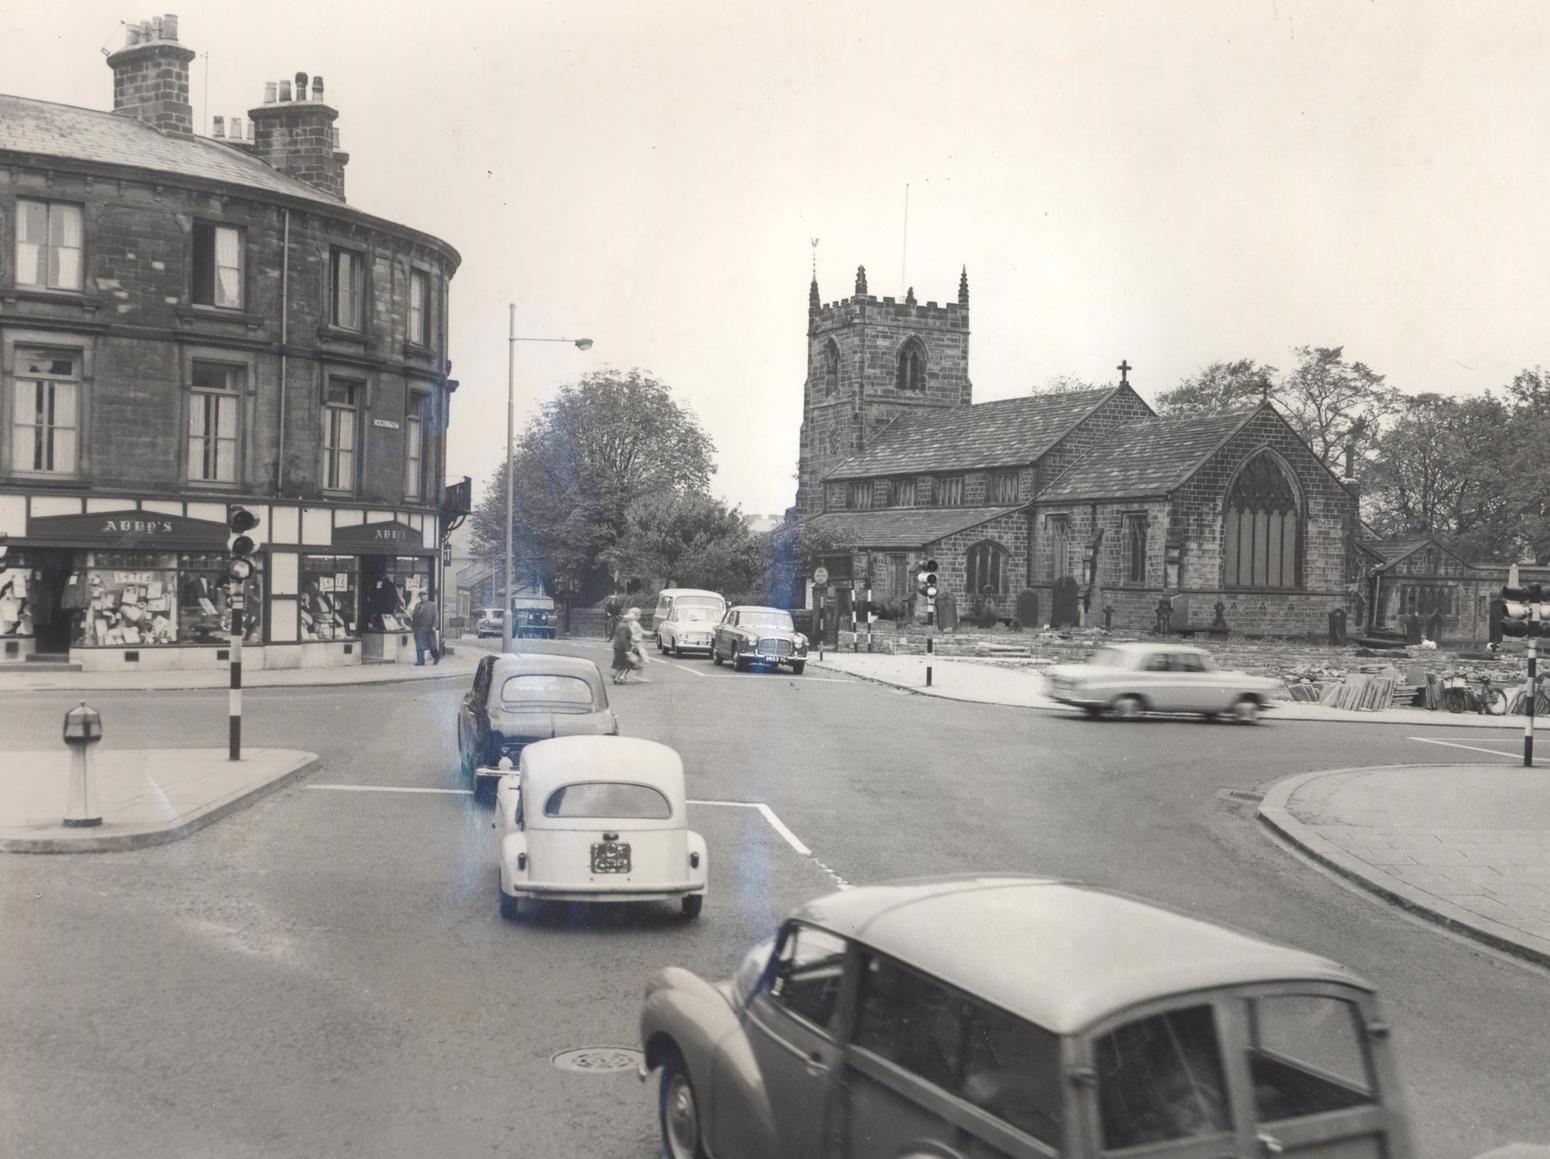 Ilkley at the end of the 1960s with the ancient Parish Church in full view.